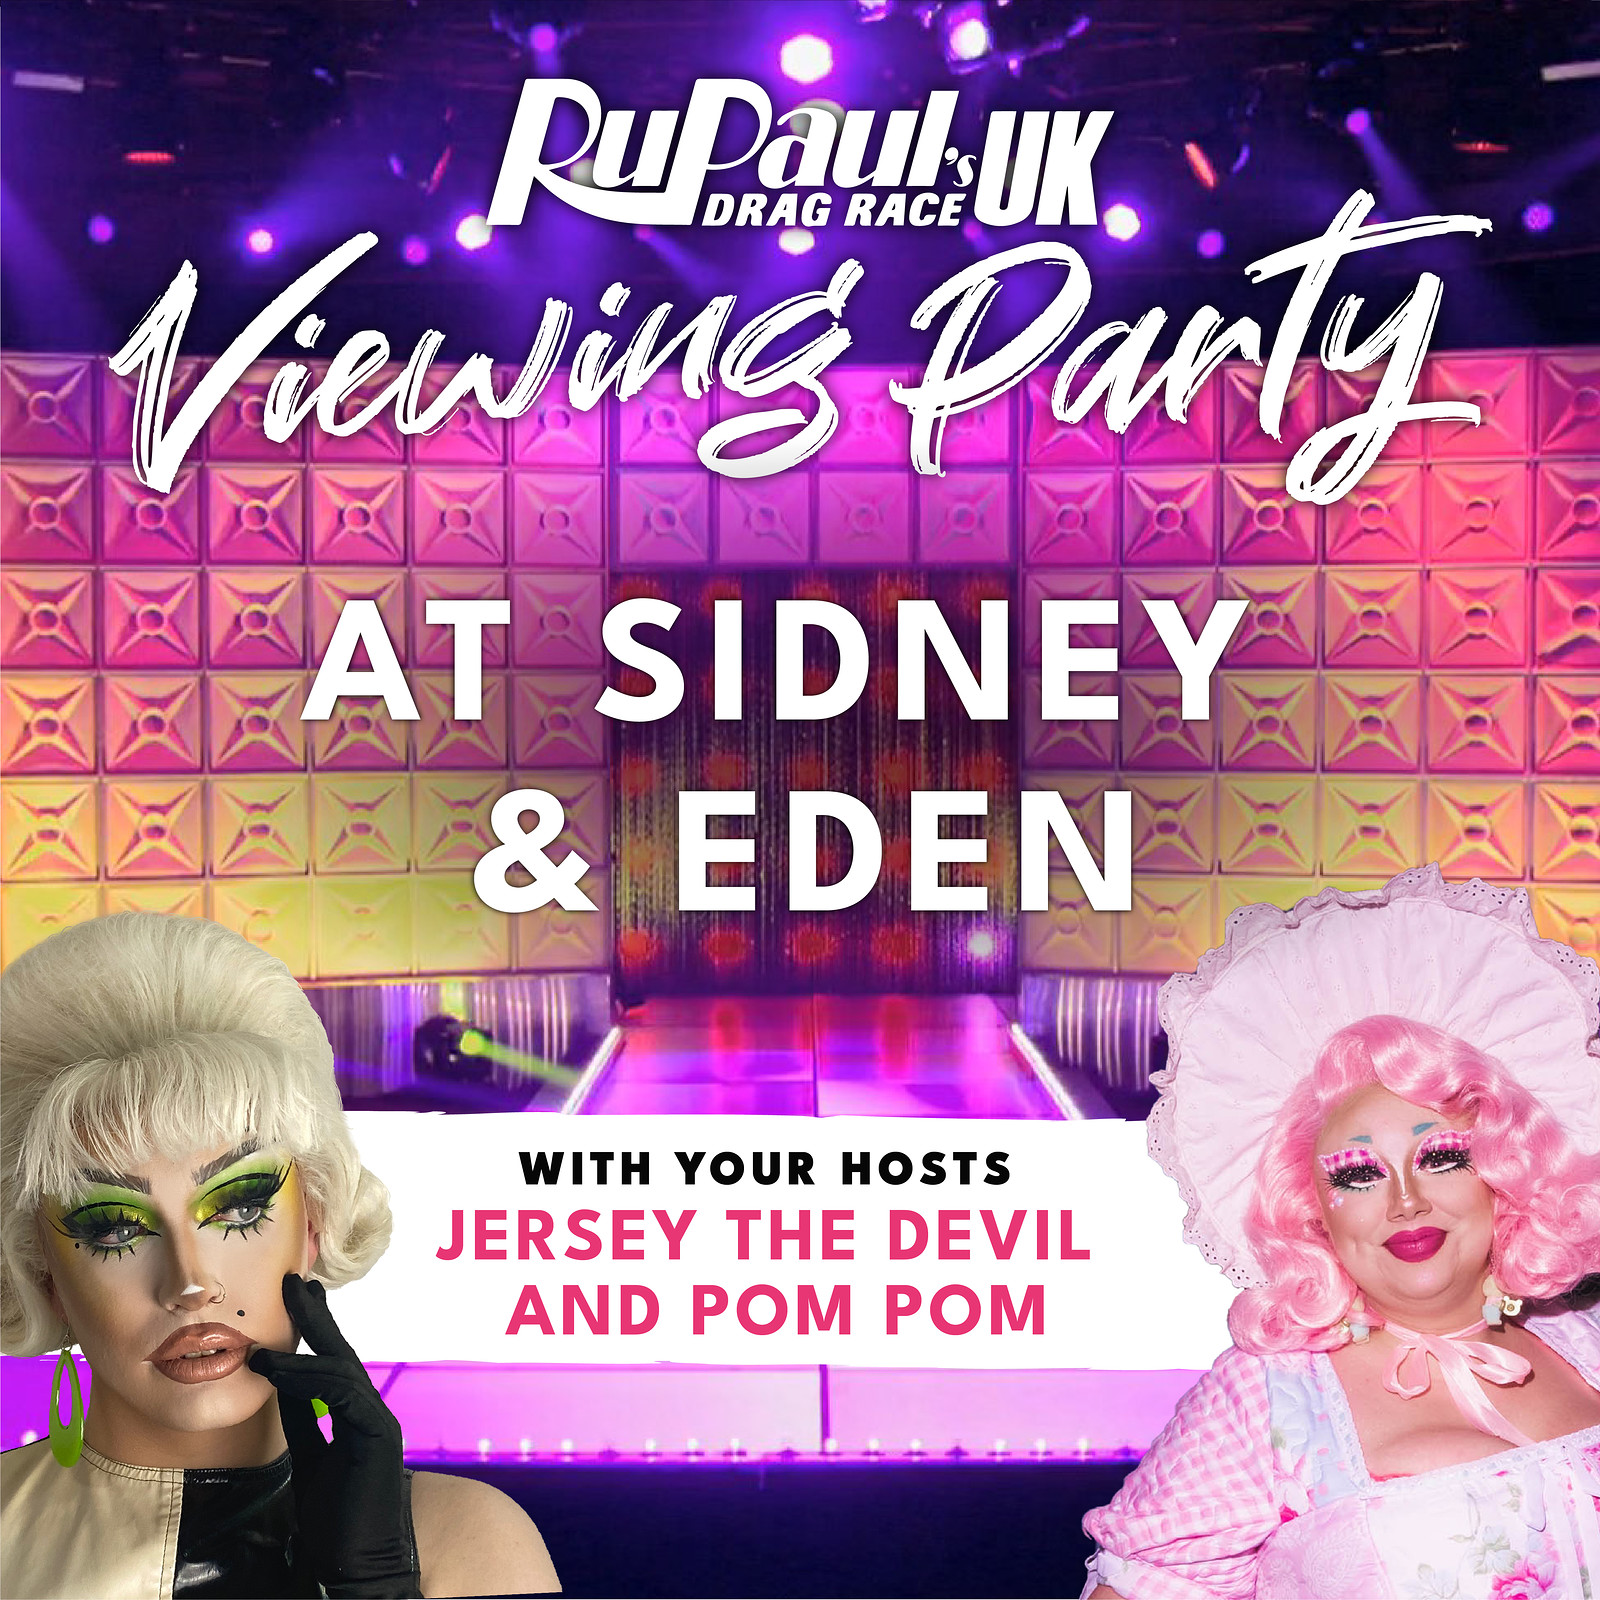 RuPaul's Drag Race UK Episode 8 Viewing Party at Sidney & Eden